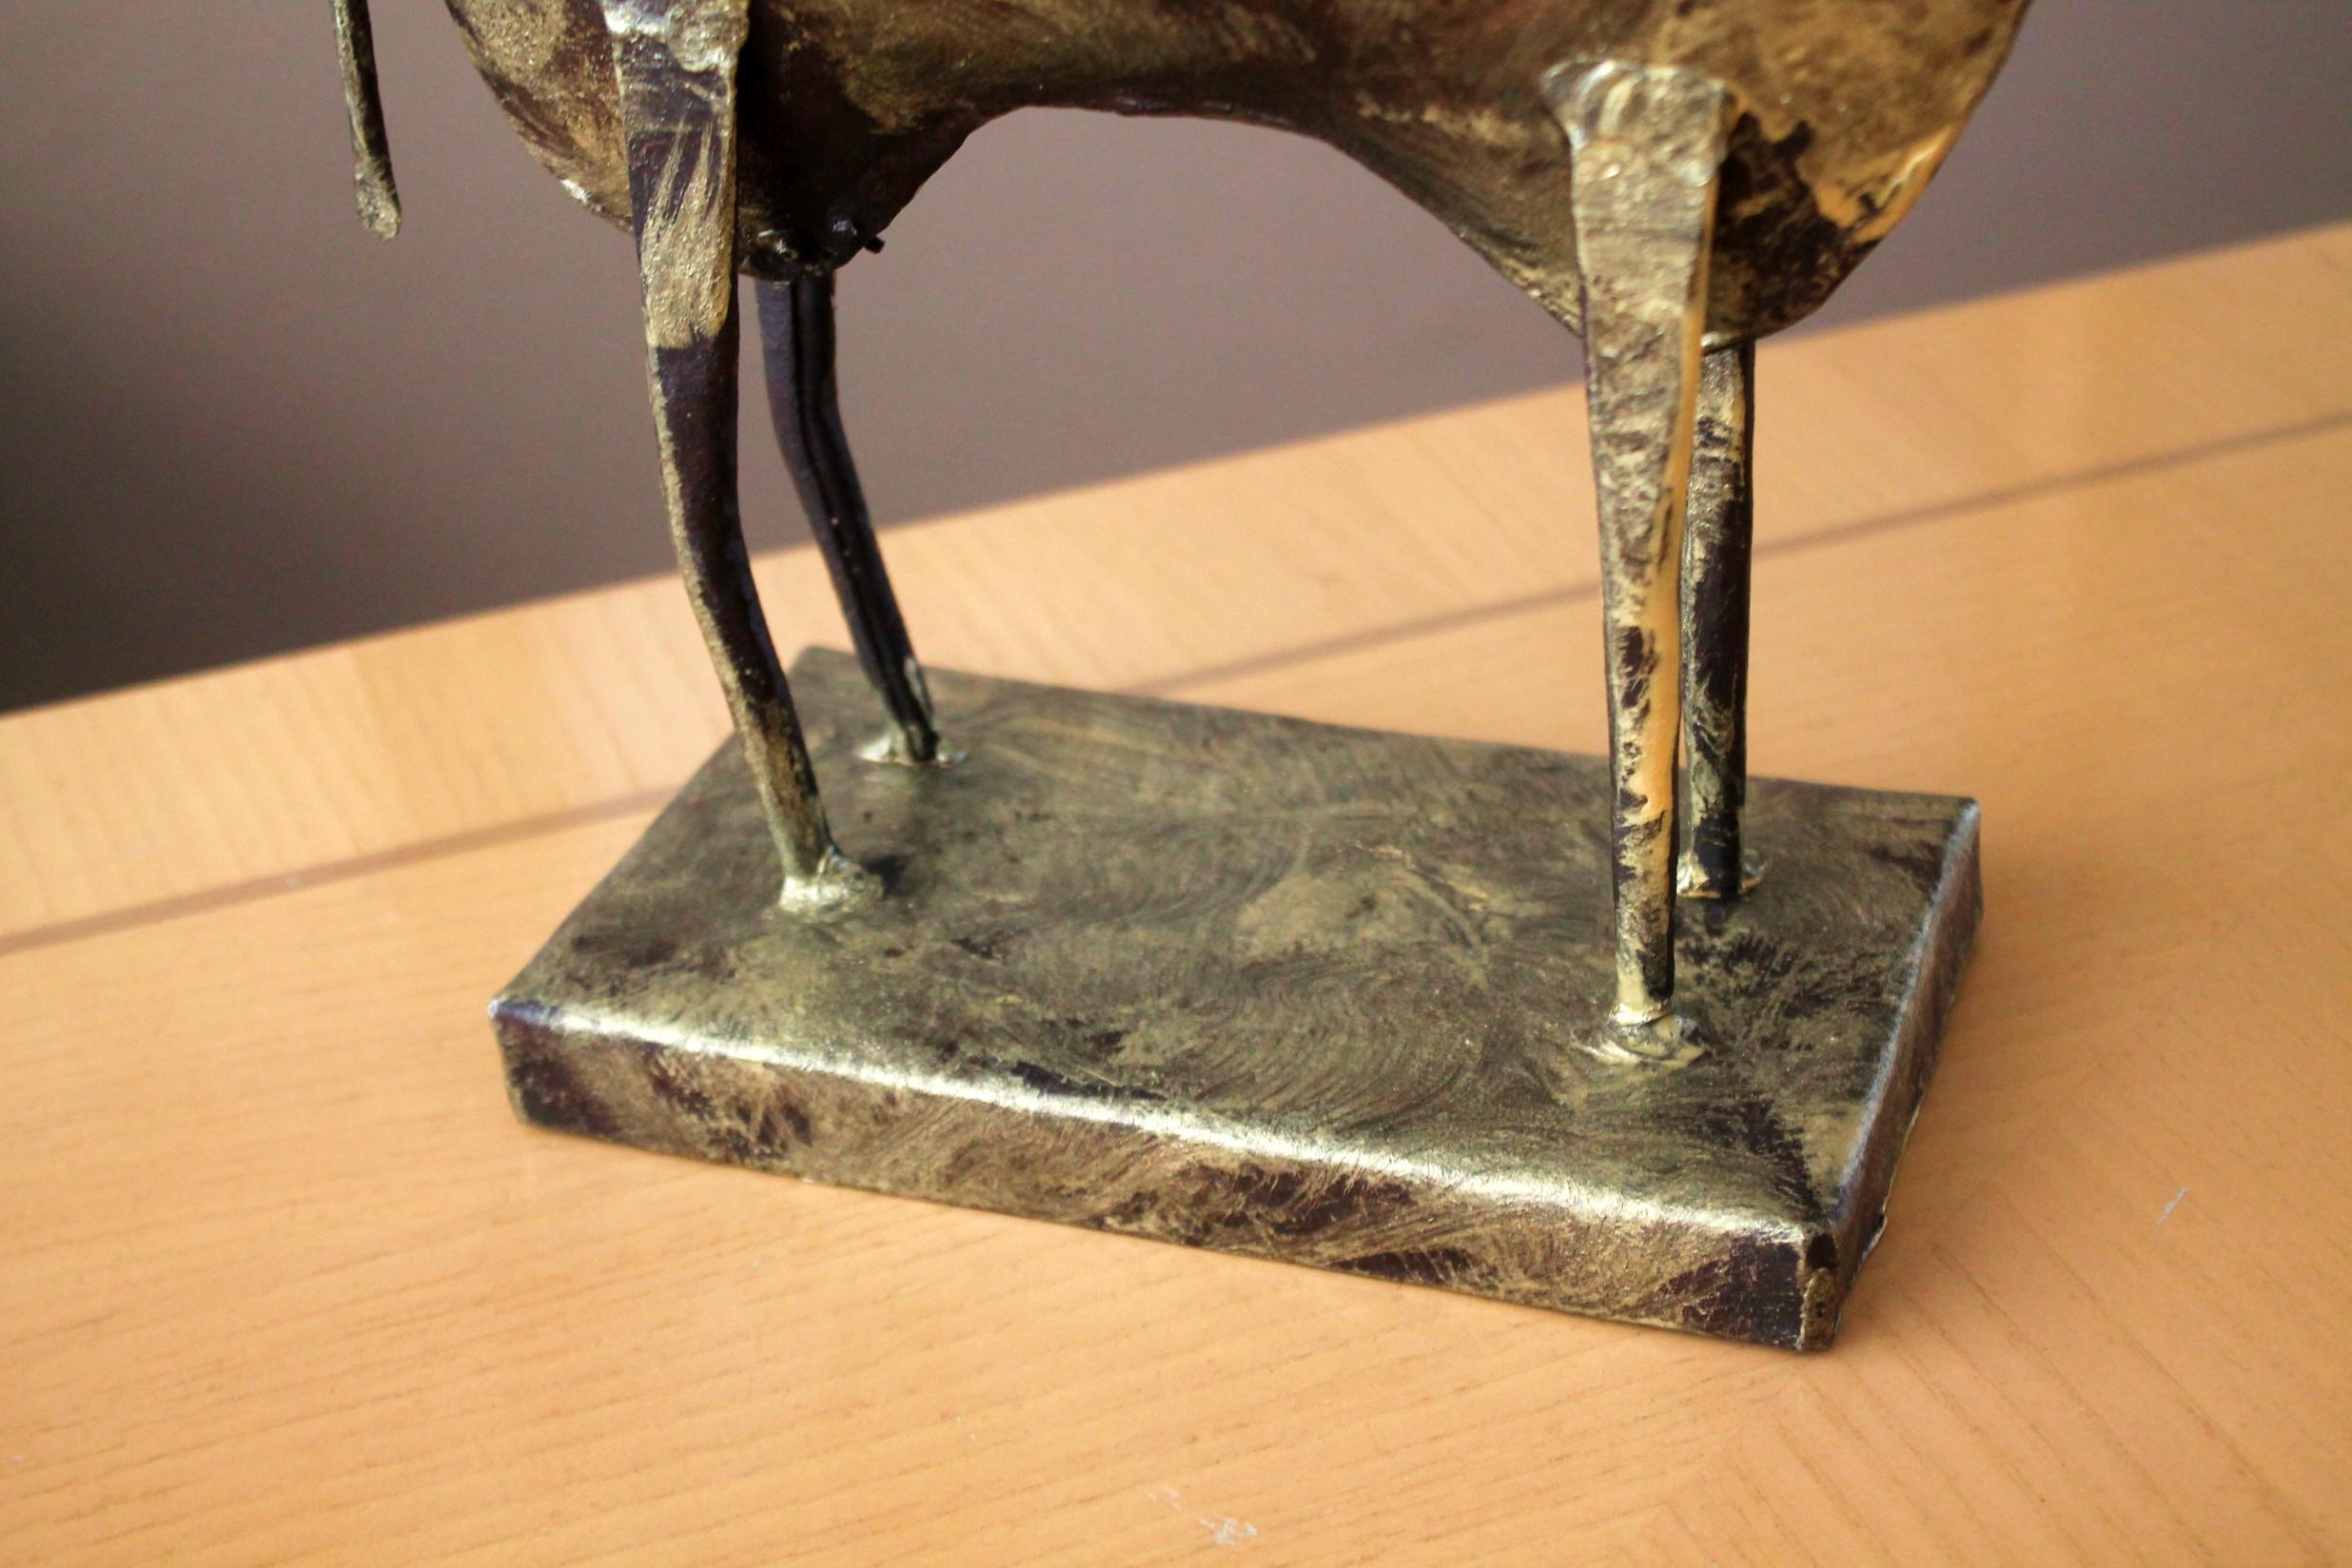 Brutalist Direct Metal Bull Sculpture Yahweh, Gilt Polychroming Stock Market In Good Condition For Sale In Peoria, AZ